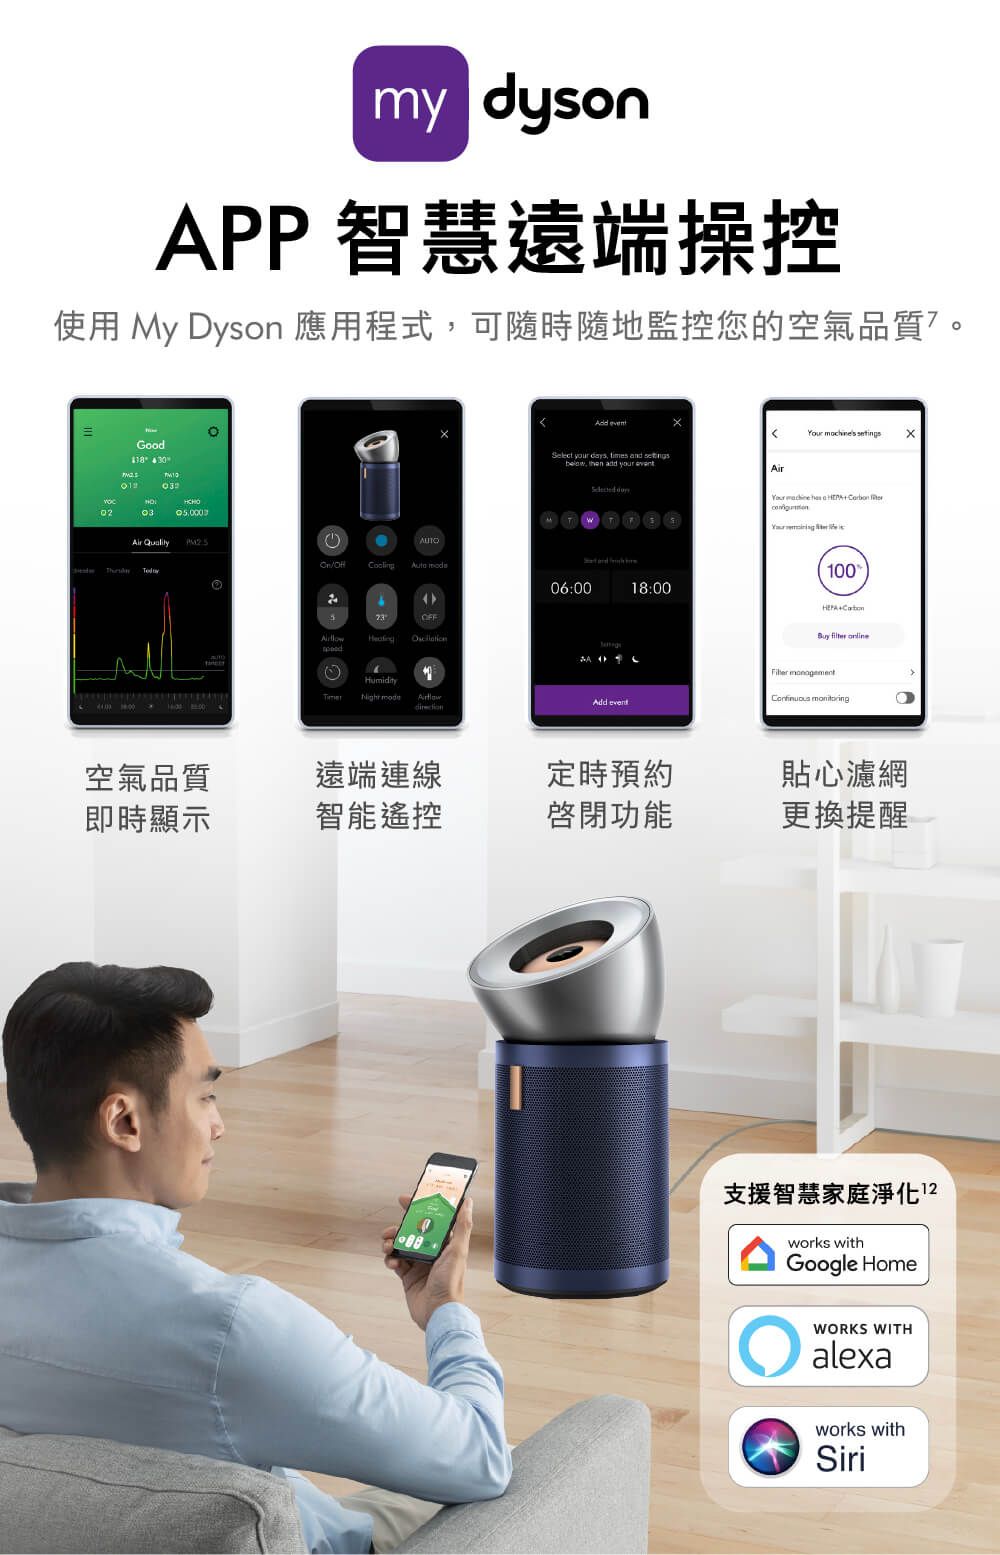 my dysonPP 智慧遠端操控使用 My Dyson 應用程式可隨時隨地監控您的空氣品質Good Air Qulity  setingsSelect  days, times  below, then  your Air  and  06:0018:00OFFA Humidity modeAdd eventYour   a   100HEPA+  online  空氣品質遠端連線定時預約貼心濾網即時顯示智能遙控啟閉功能更換提醒支援智慧家庭淨化works withGoogle HomeWORKS WITHalexaworks withSiri